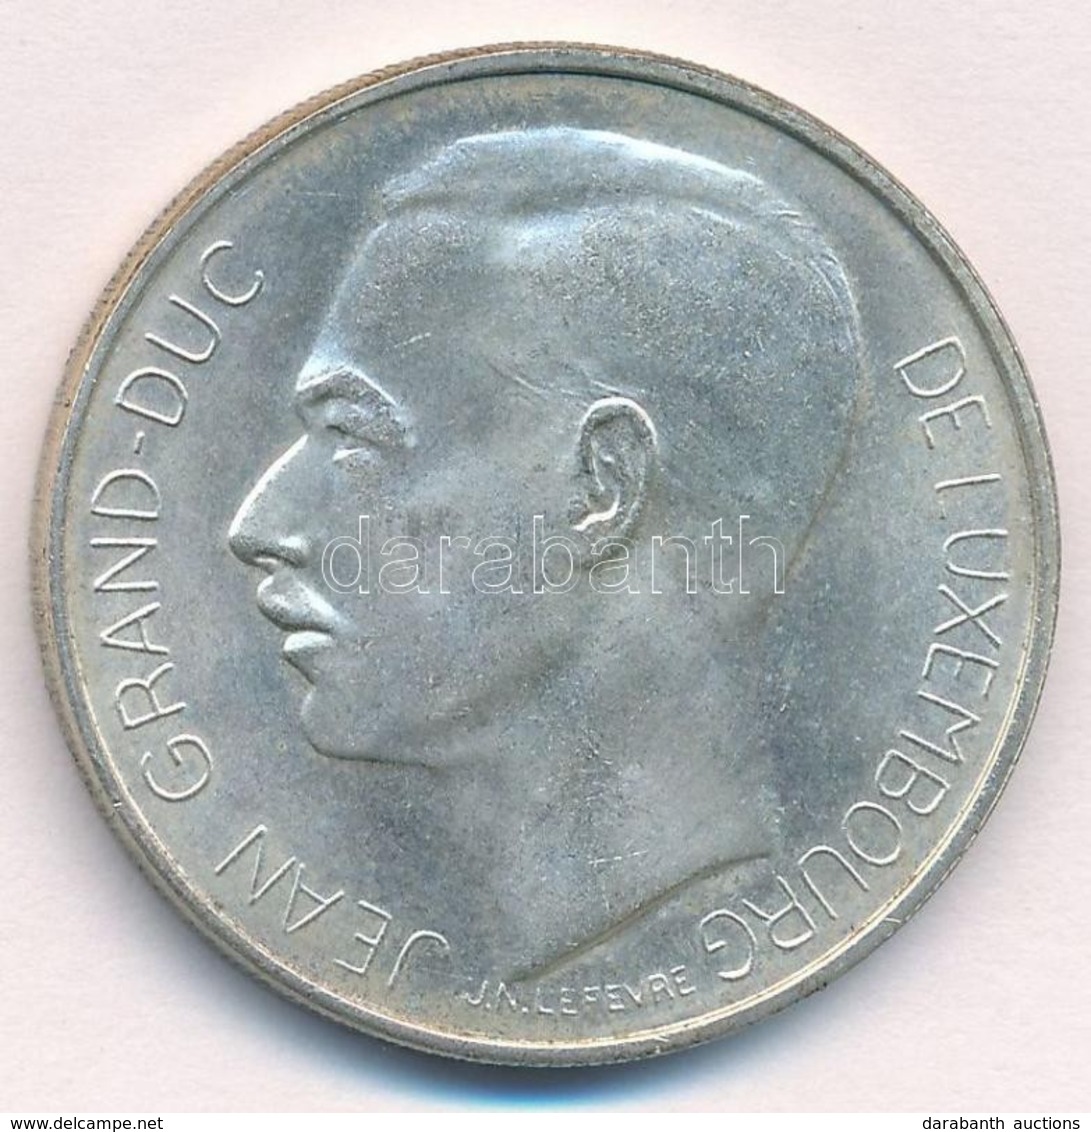 Luxemburg 1964. 100Fr Ag 'Jean' T:1-
Luxembourg 1964. 100 Francs Ag 'Jean' C:AU 
Krause KM#54 - Sin Clasificación